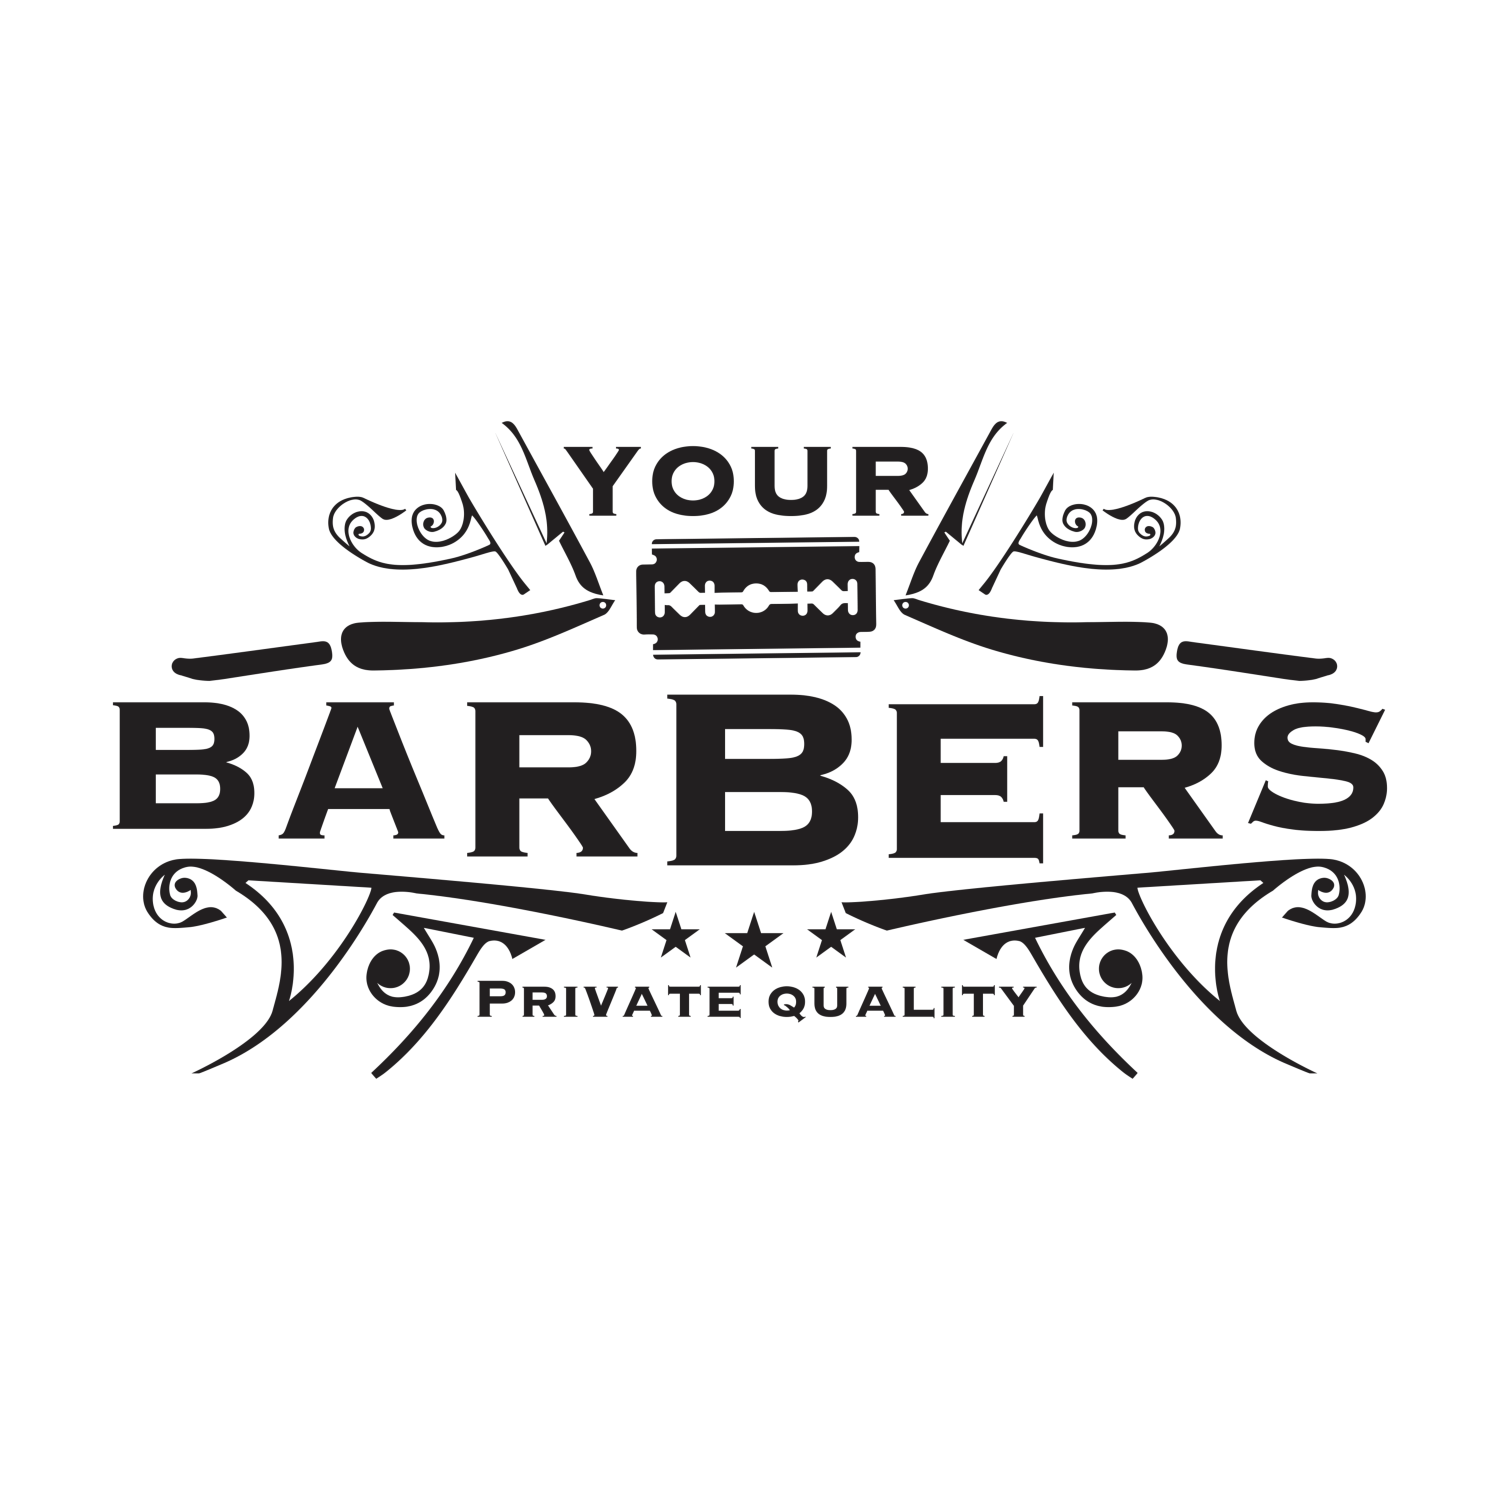 Your barbers